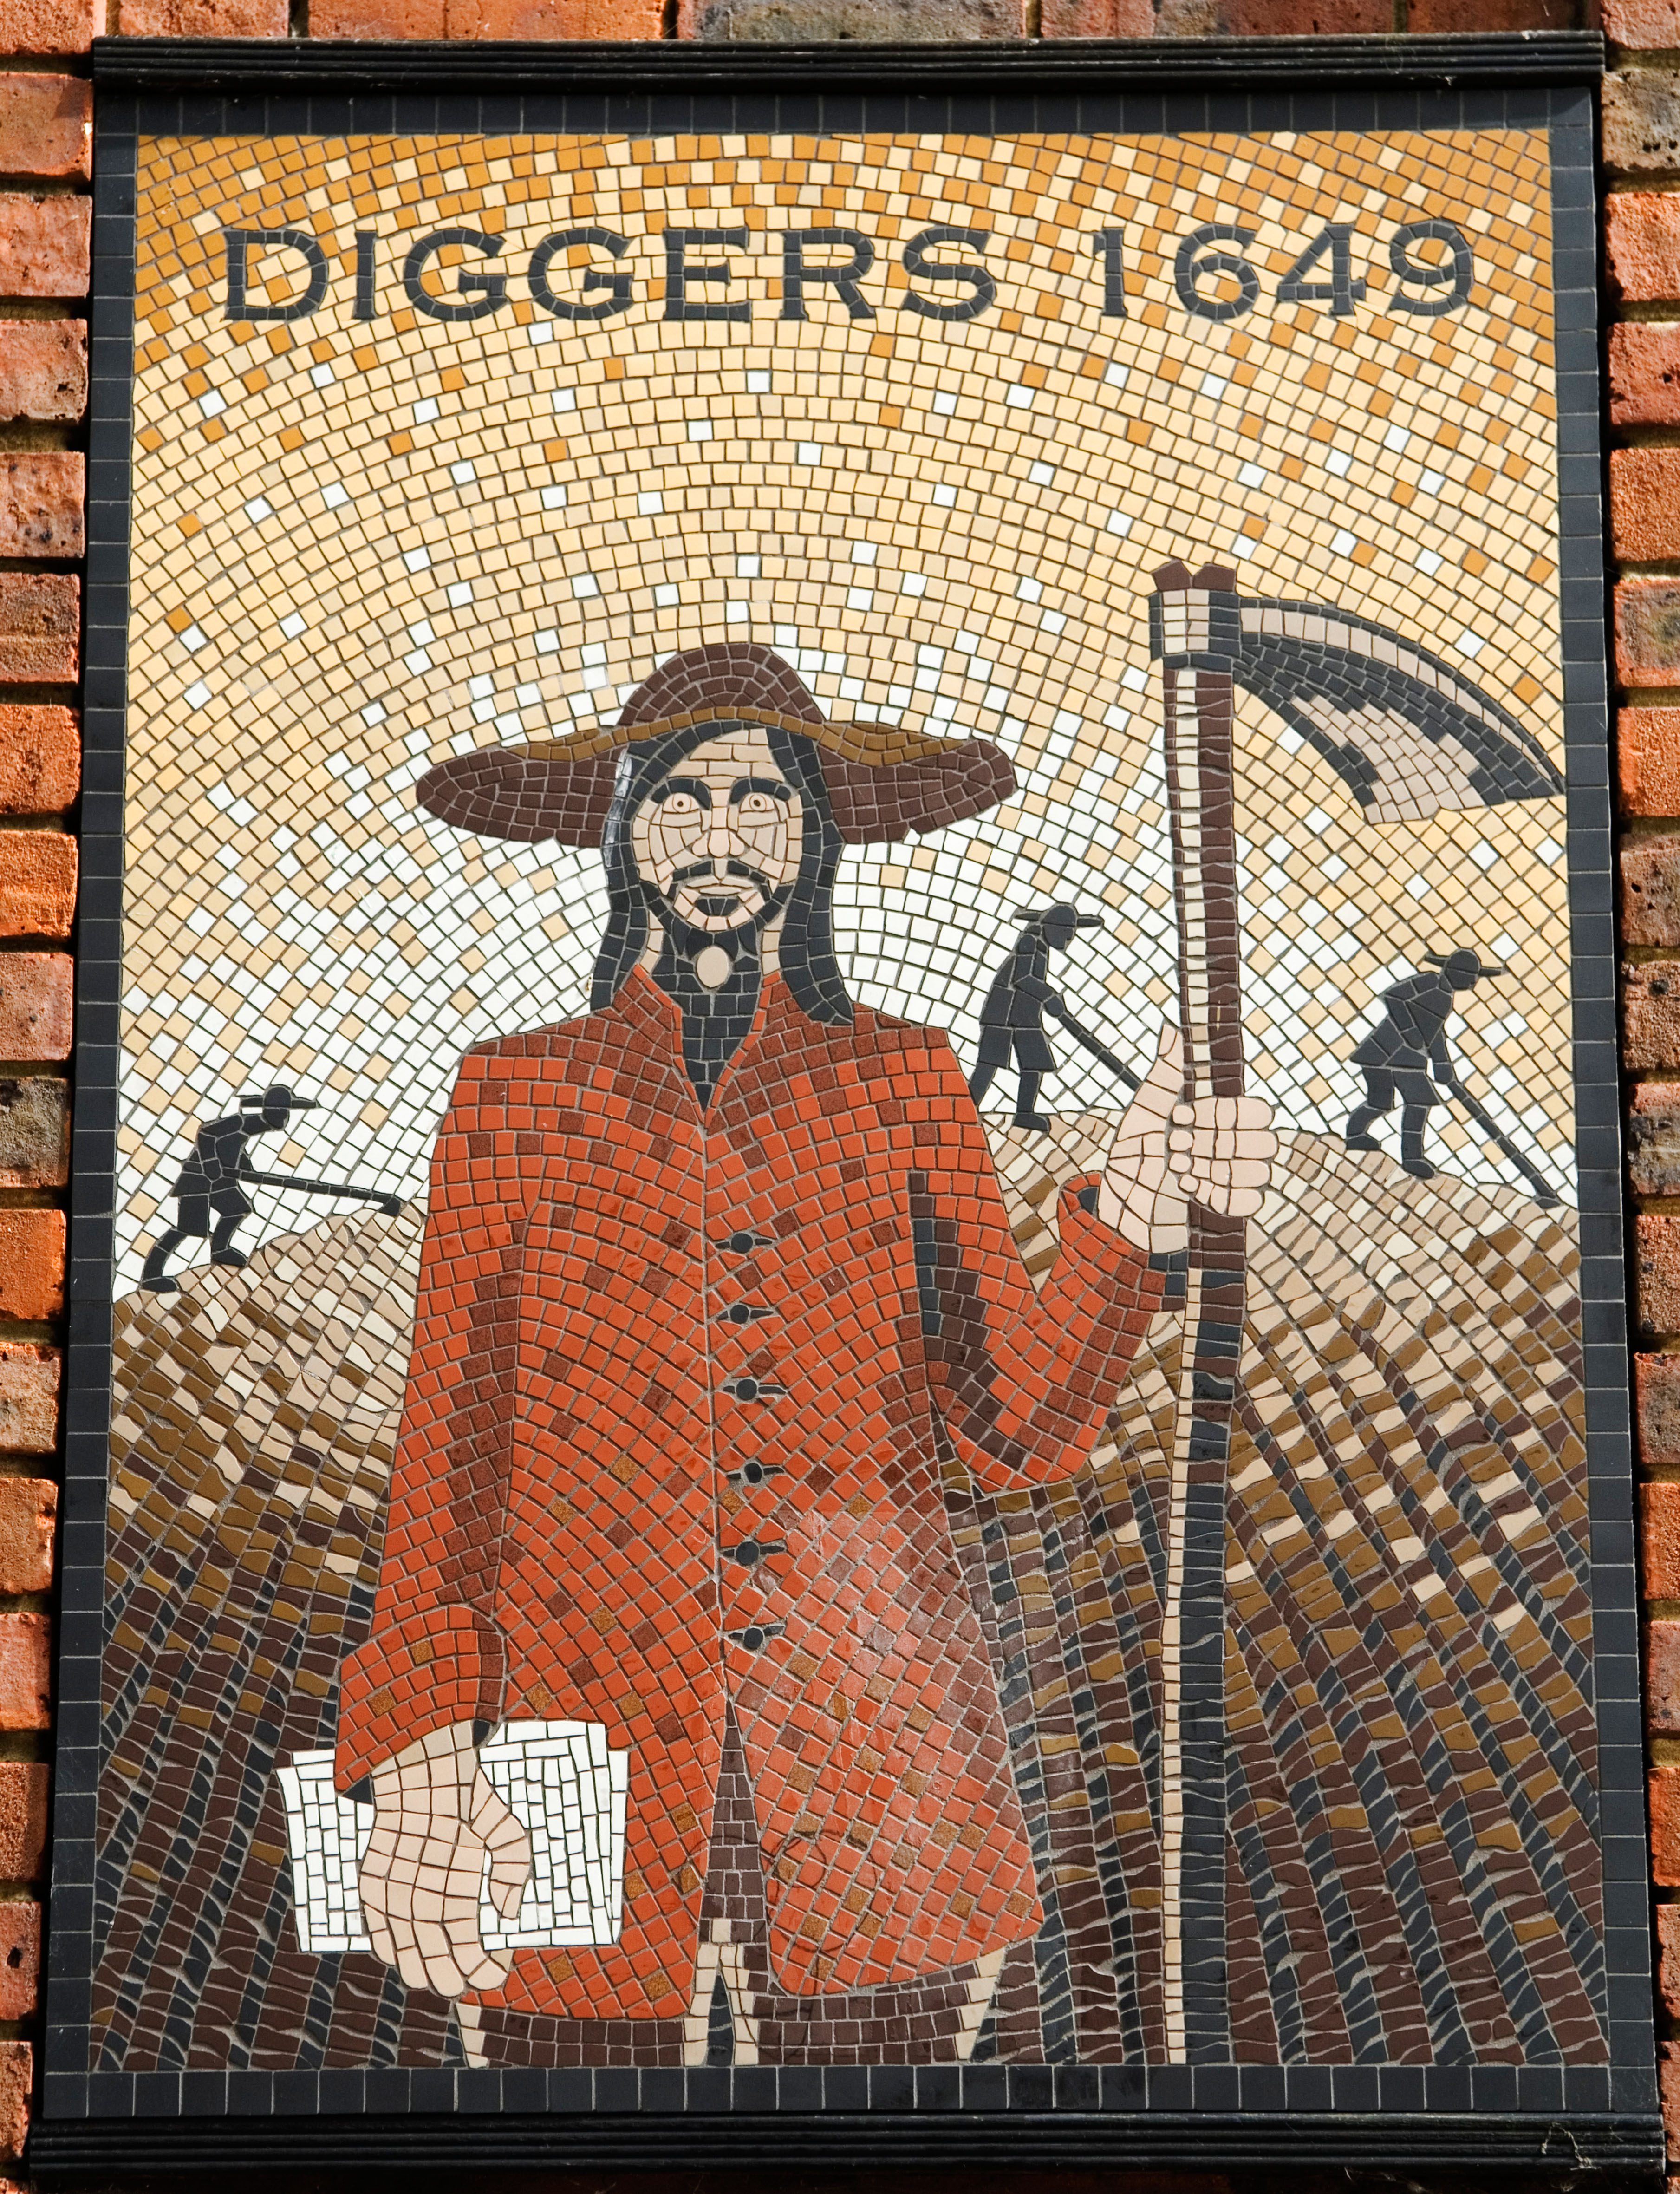 The Diggers took inspiration and their name from a group of 17th-century English dissidents. 